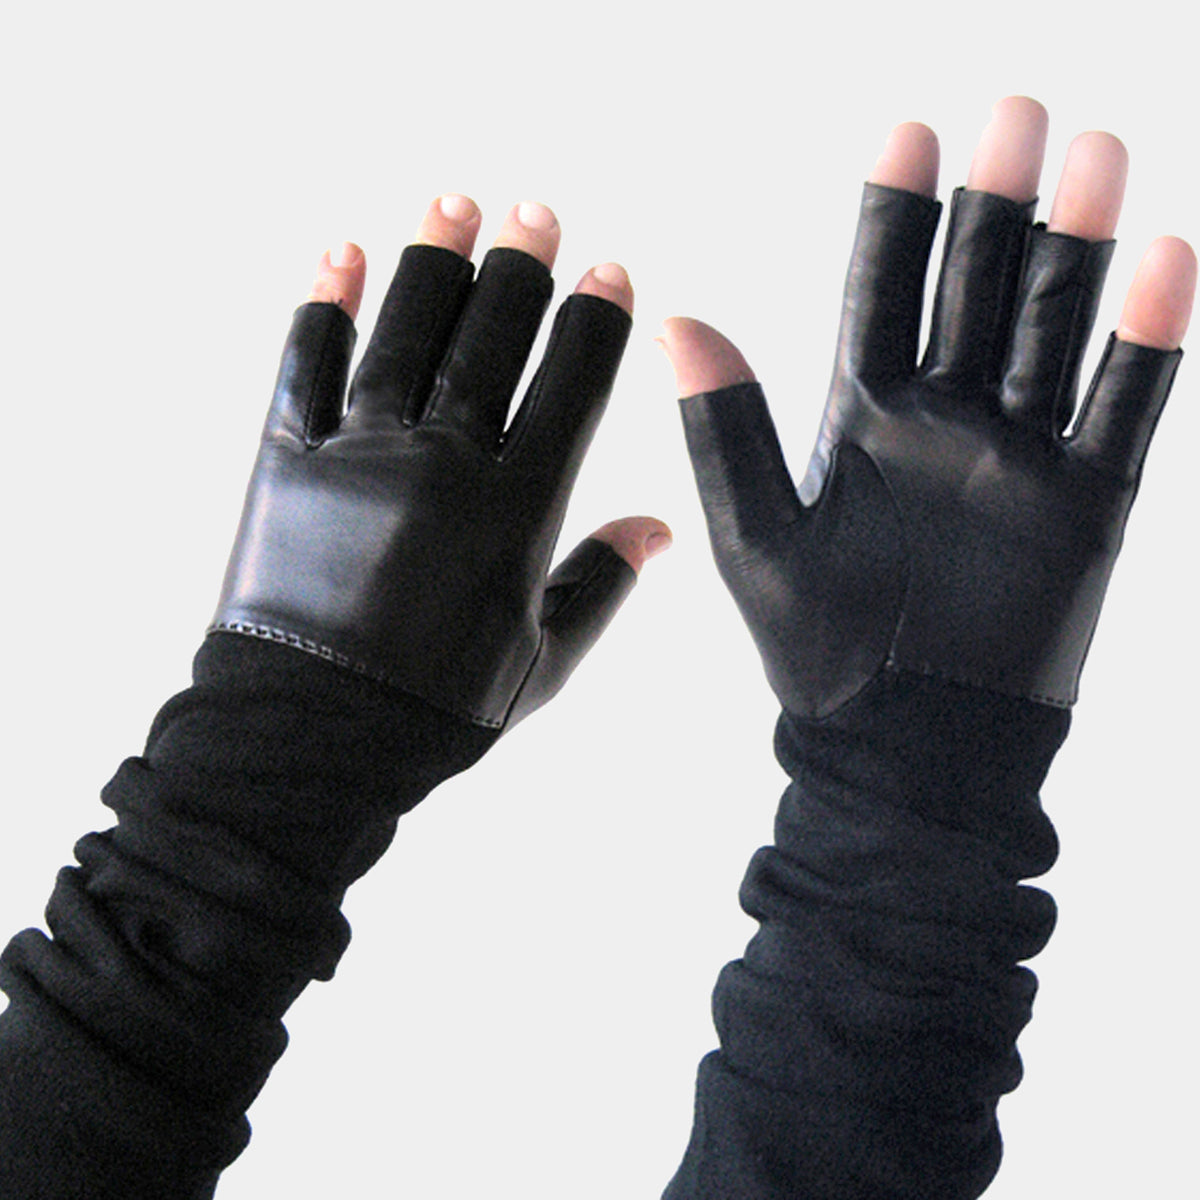 MENS FINGERLESS GLOVES LEATHER AND KNIT